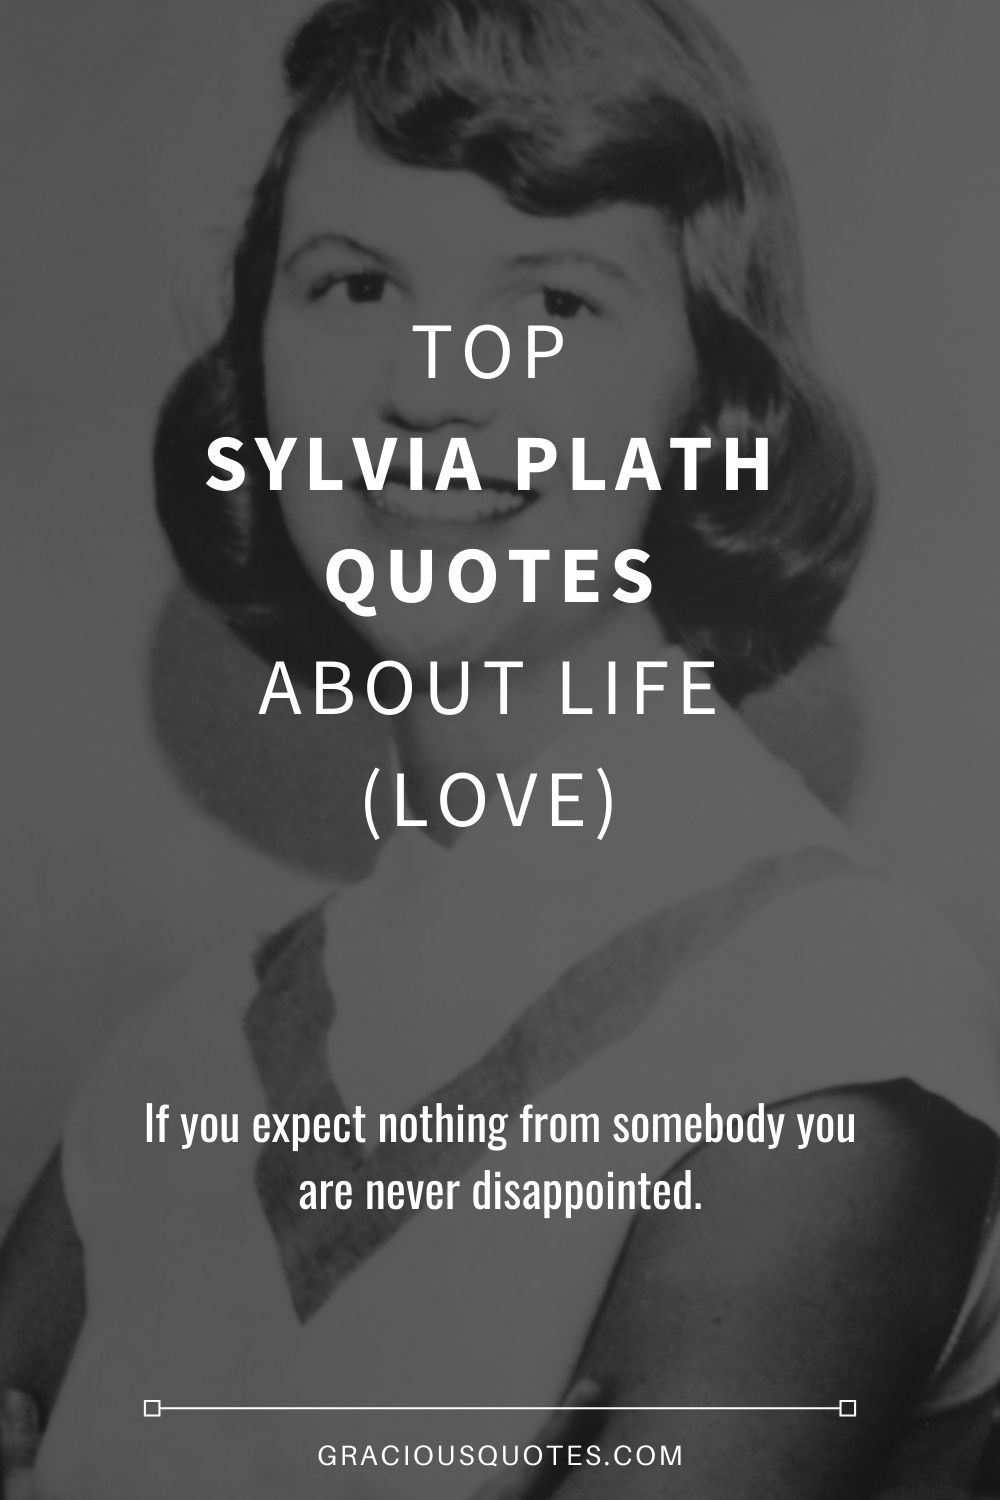 Top Sylvia Plath Quotes About Life (LOVE) - Gracious Quotes